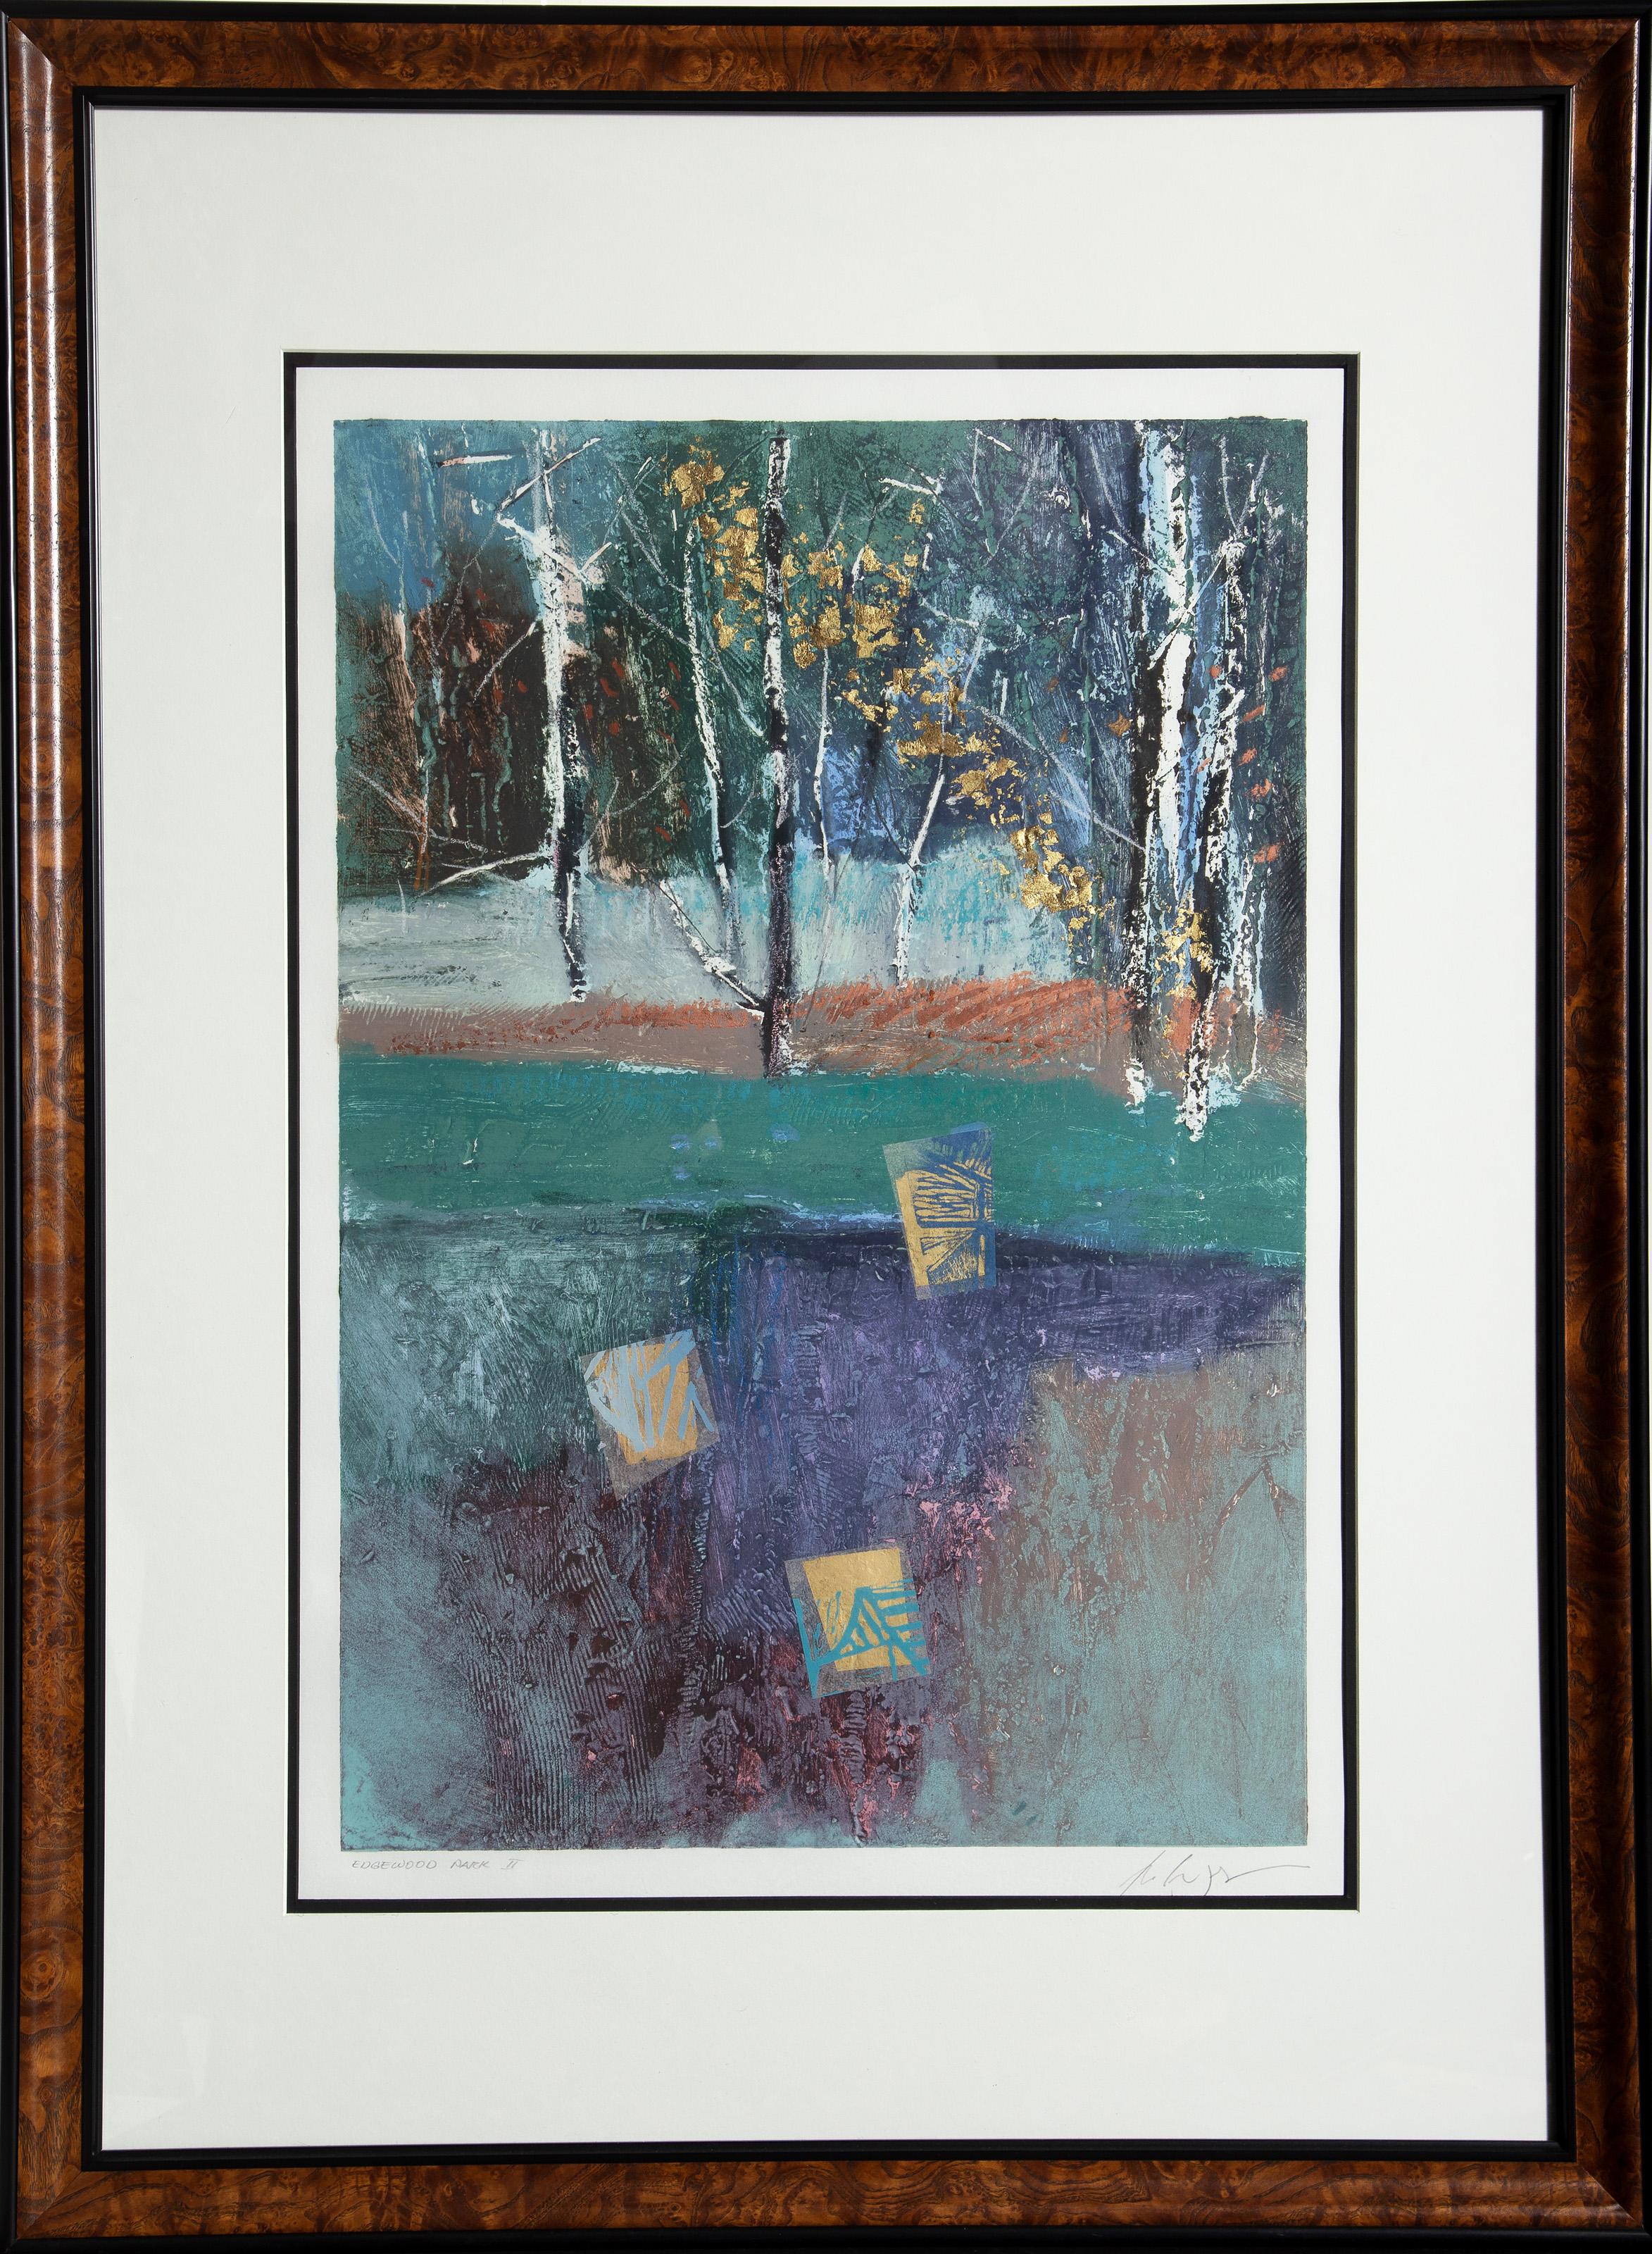 Manuel Rodriguez Jr., Filipino (1942 - ) -  Edgewood Park II. Medium: Monoprint with Acrylic, Gold Foil and Mixed Media on Paper, signed and titled in pencil, Image Size: 29.25 x 19.75, Size: 41 x 29.5 in. (104.14 x 74.93 cm), Frame Size: 45.5 x